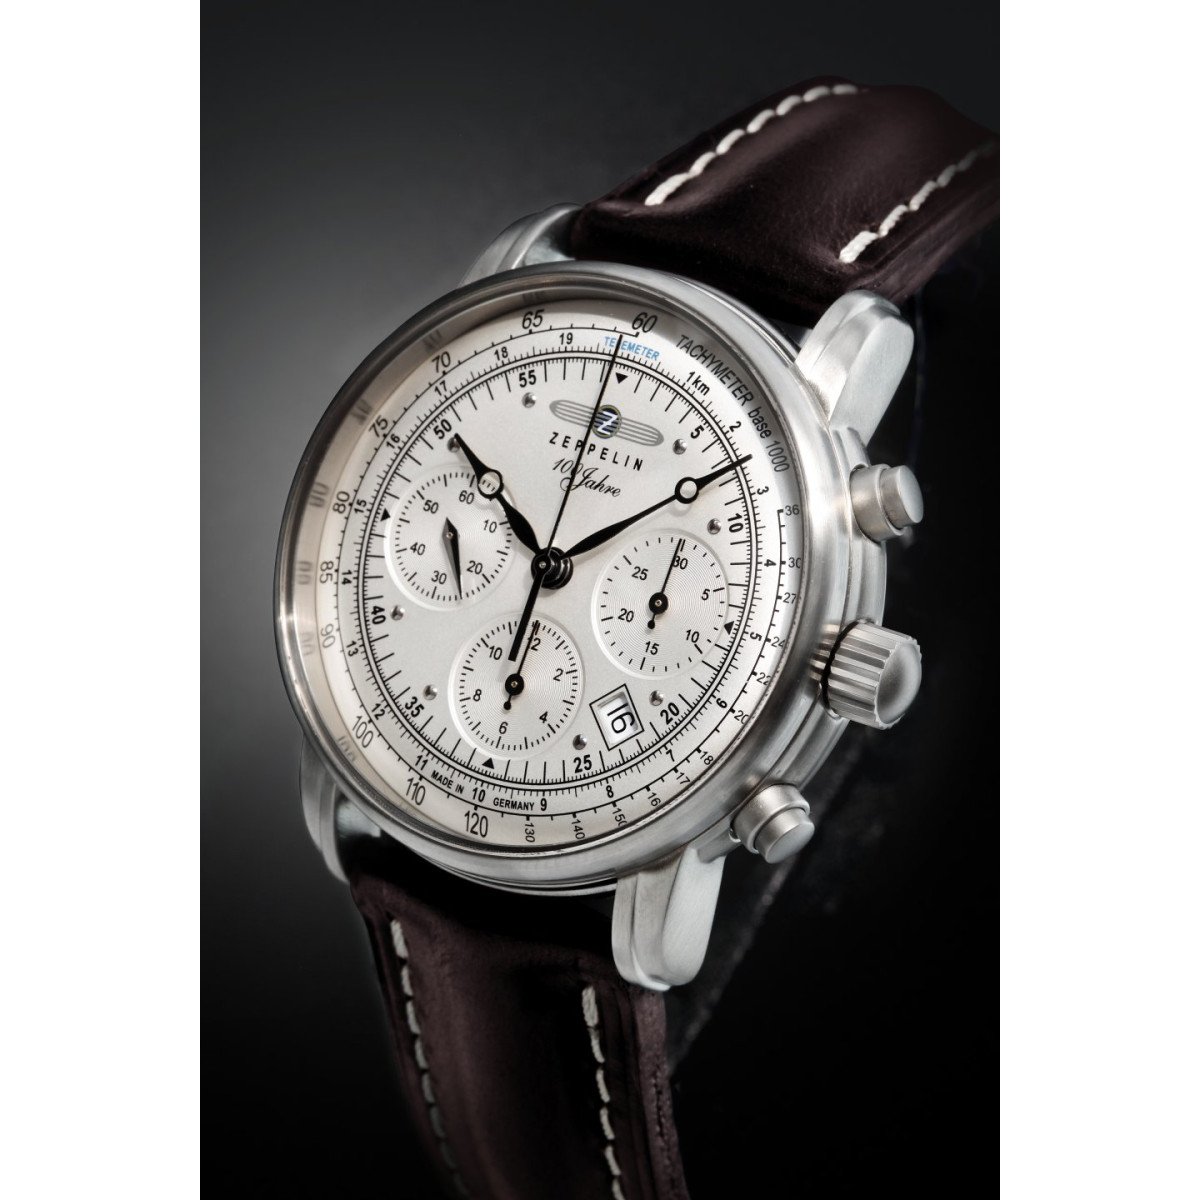 100 Jahre Zeppelin Automatic chronograph with leather strap